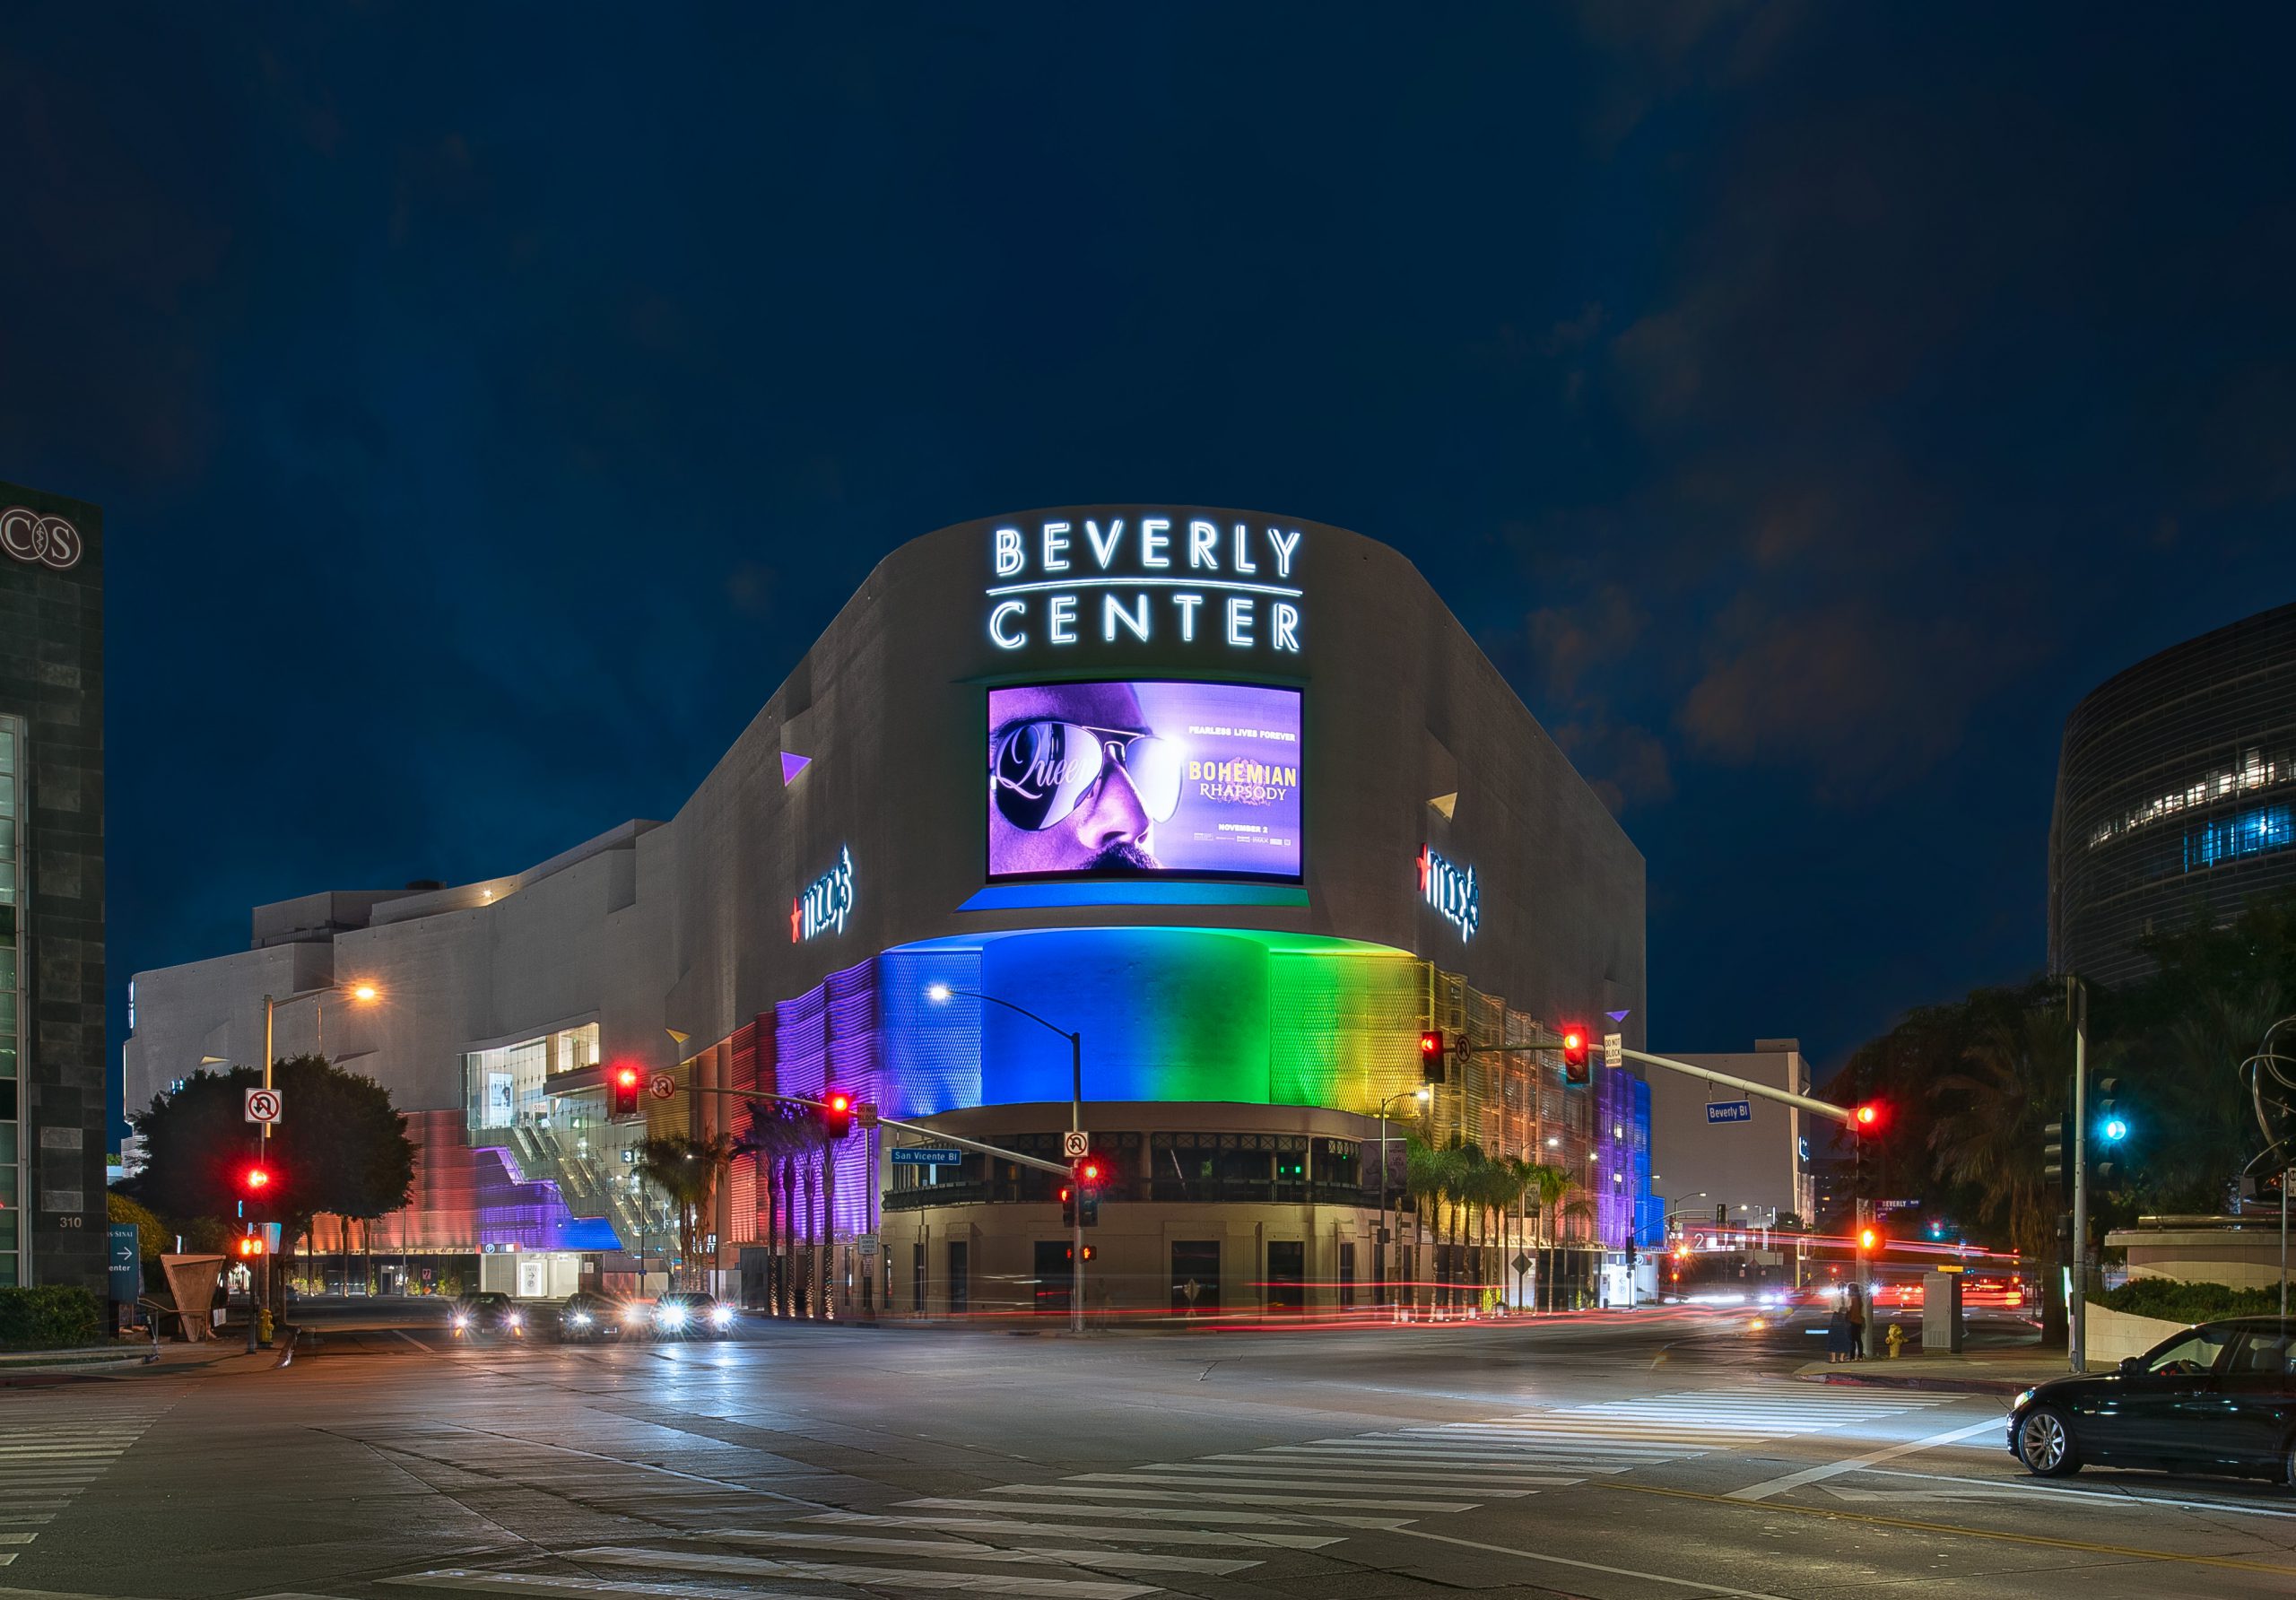 Beverly Center in Los Angeles, United States